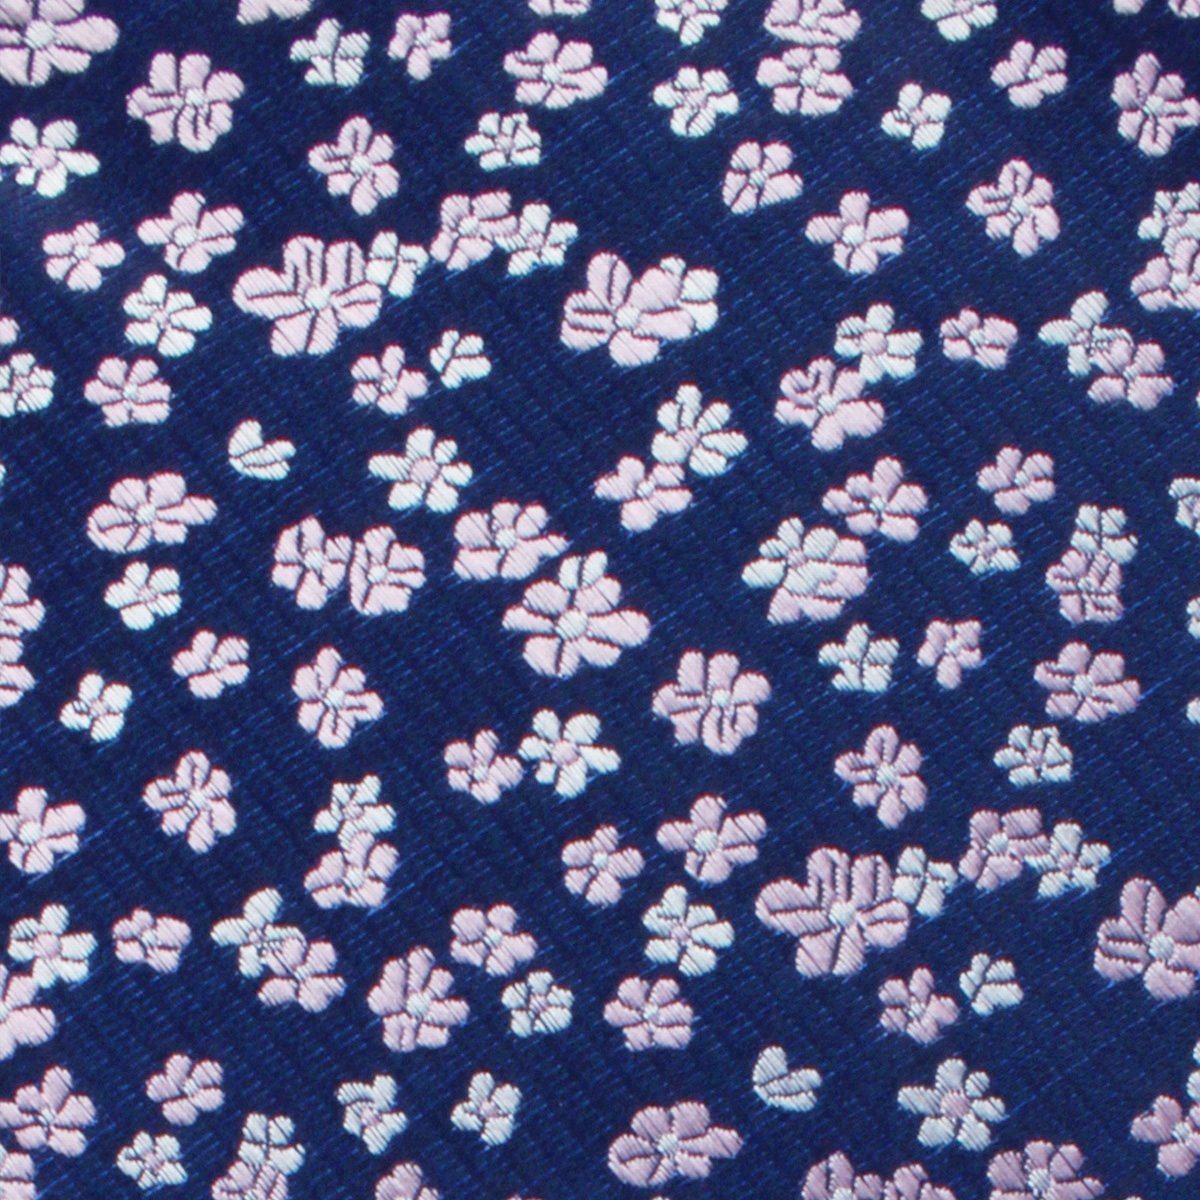 Aster Amellus Lilac Floral Necktie Fabric